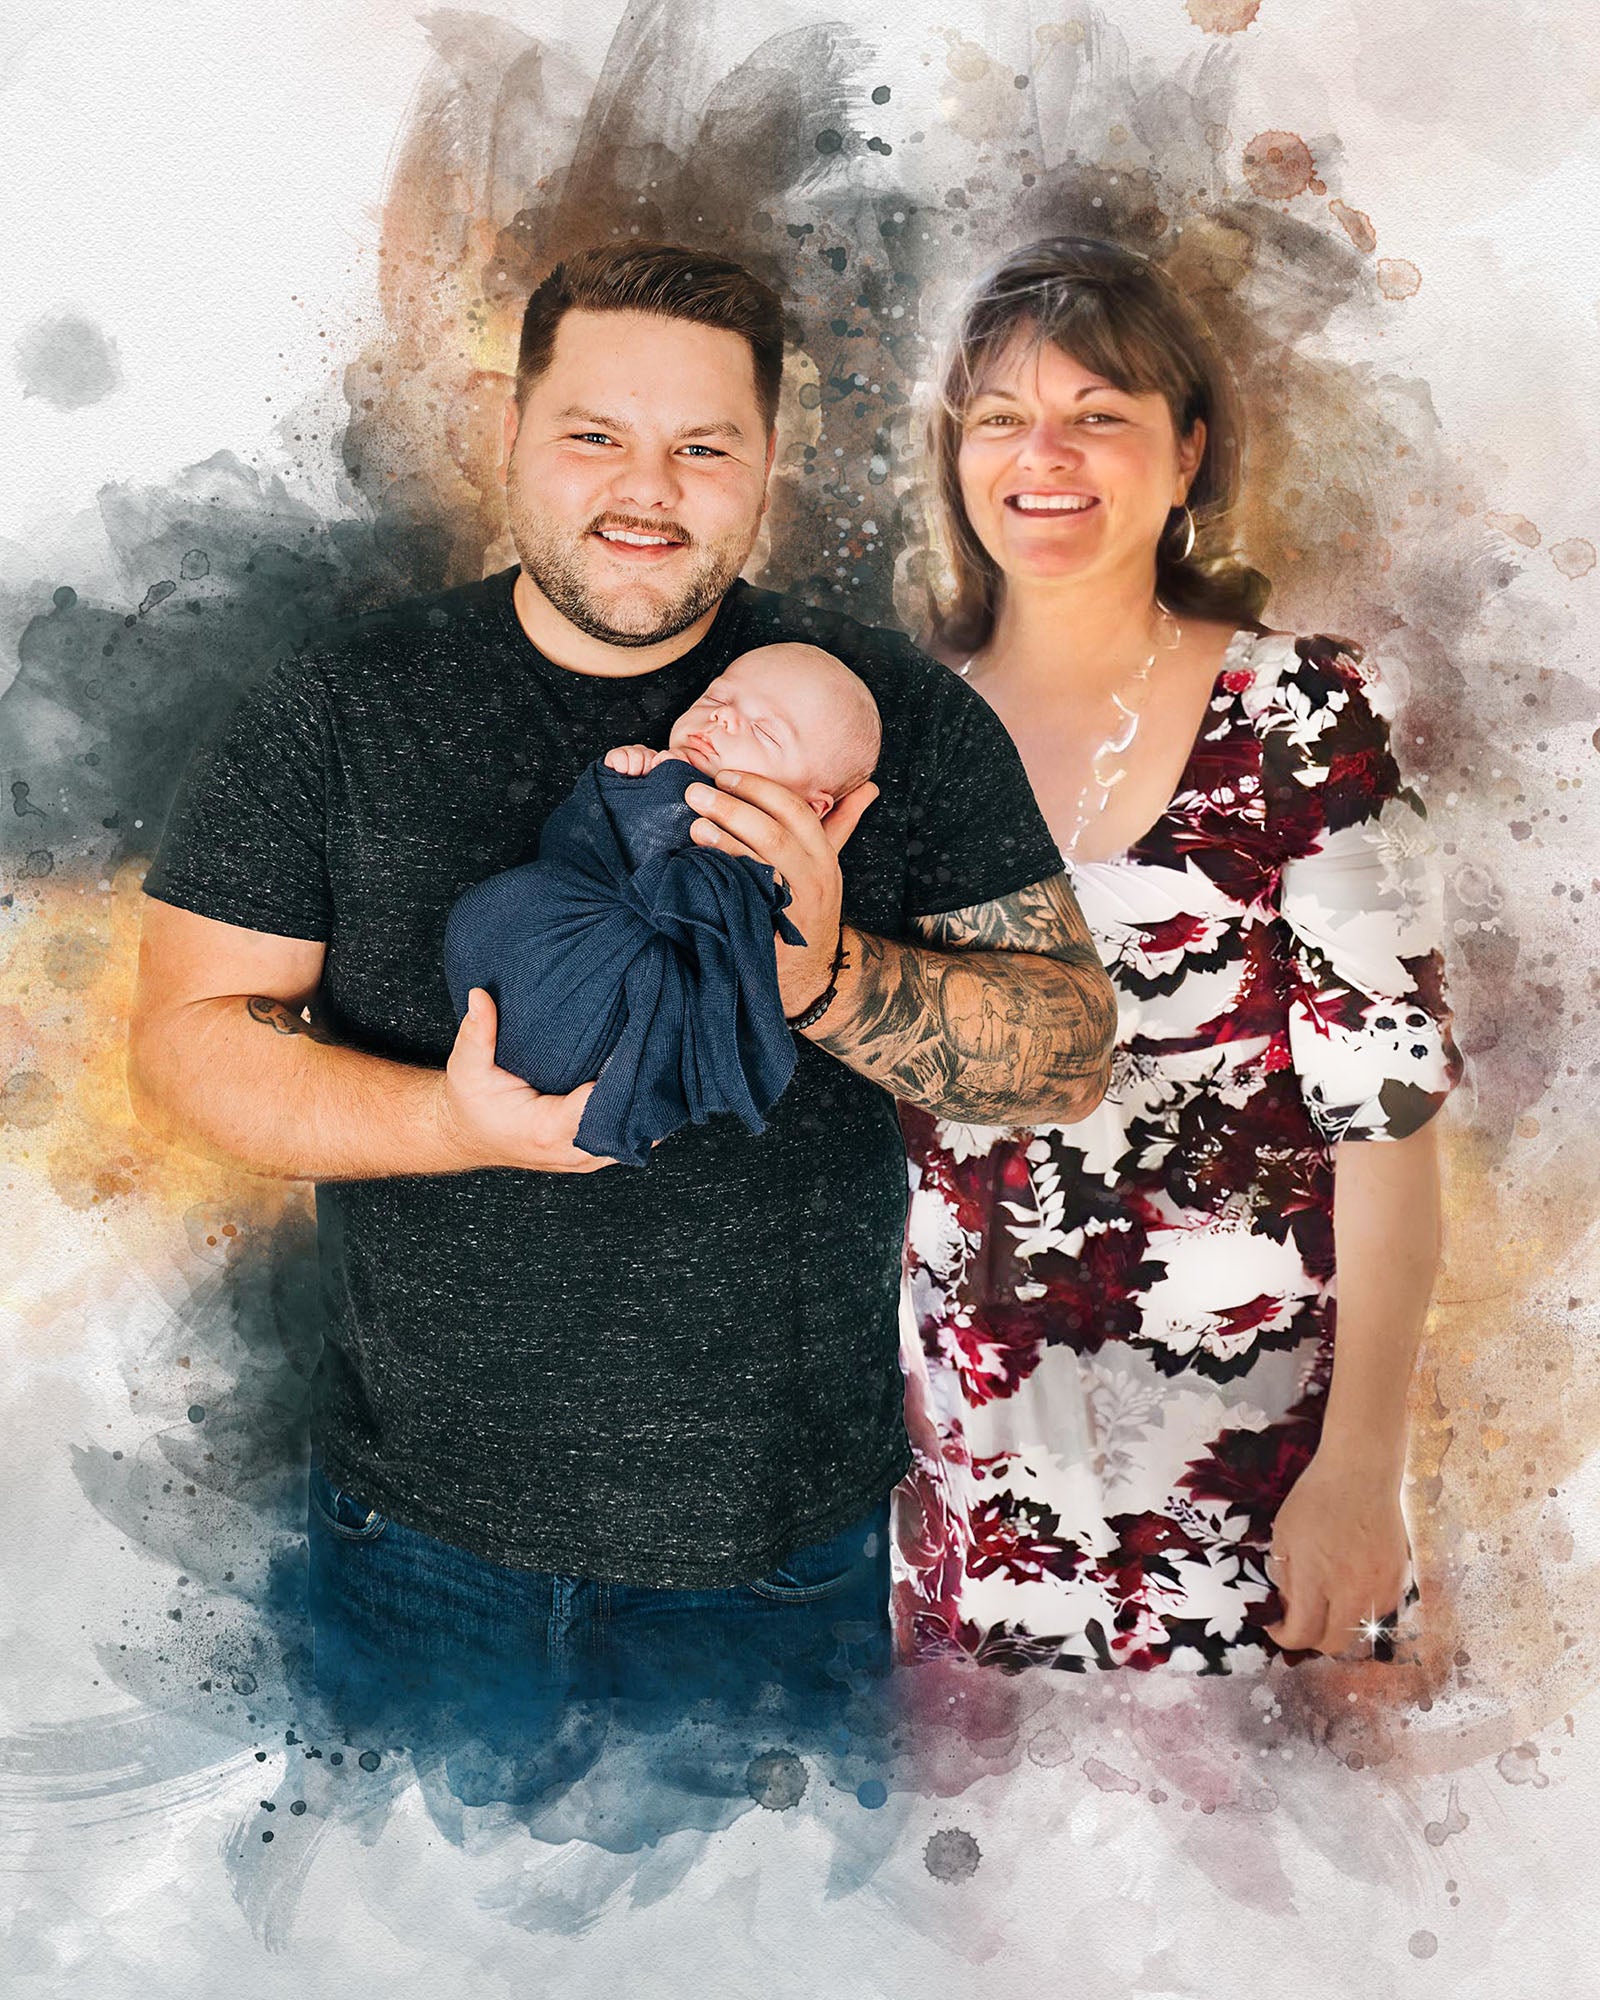 🌈 Add People to Photo | Add Someone into a Picture | Add Deceased Loved One | Loss Loved One | Custom Wedding Family Portrait | Merge Photos Into Painting | Combine Photos | Personalized Gifts - FromPicToArt